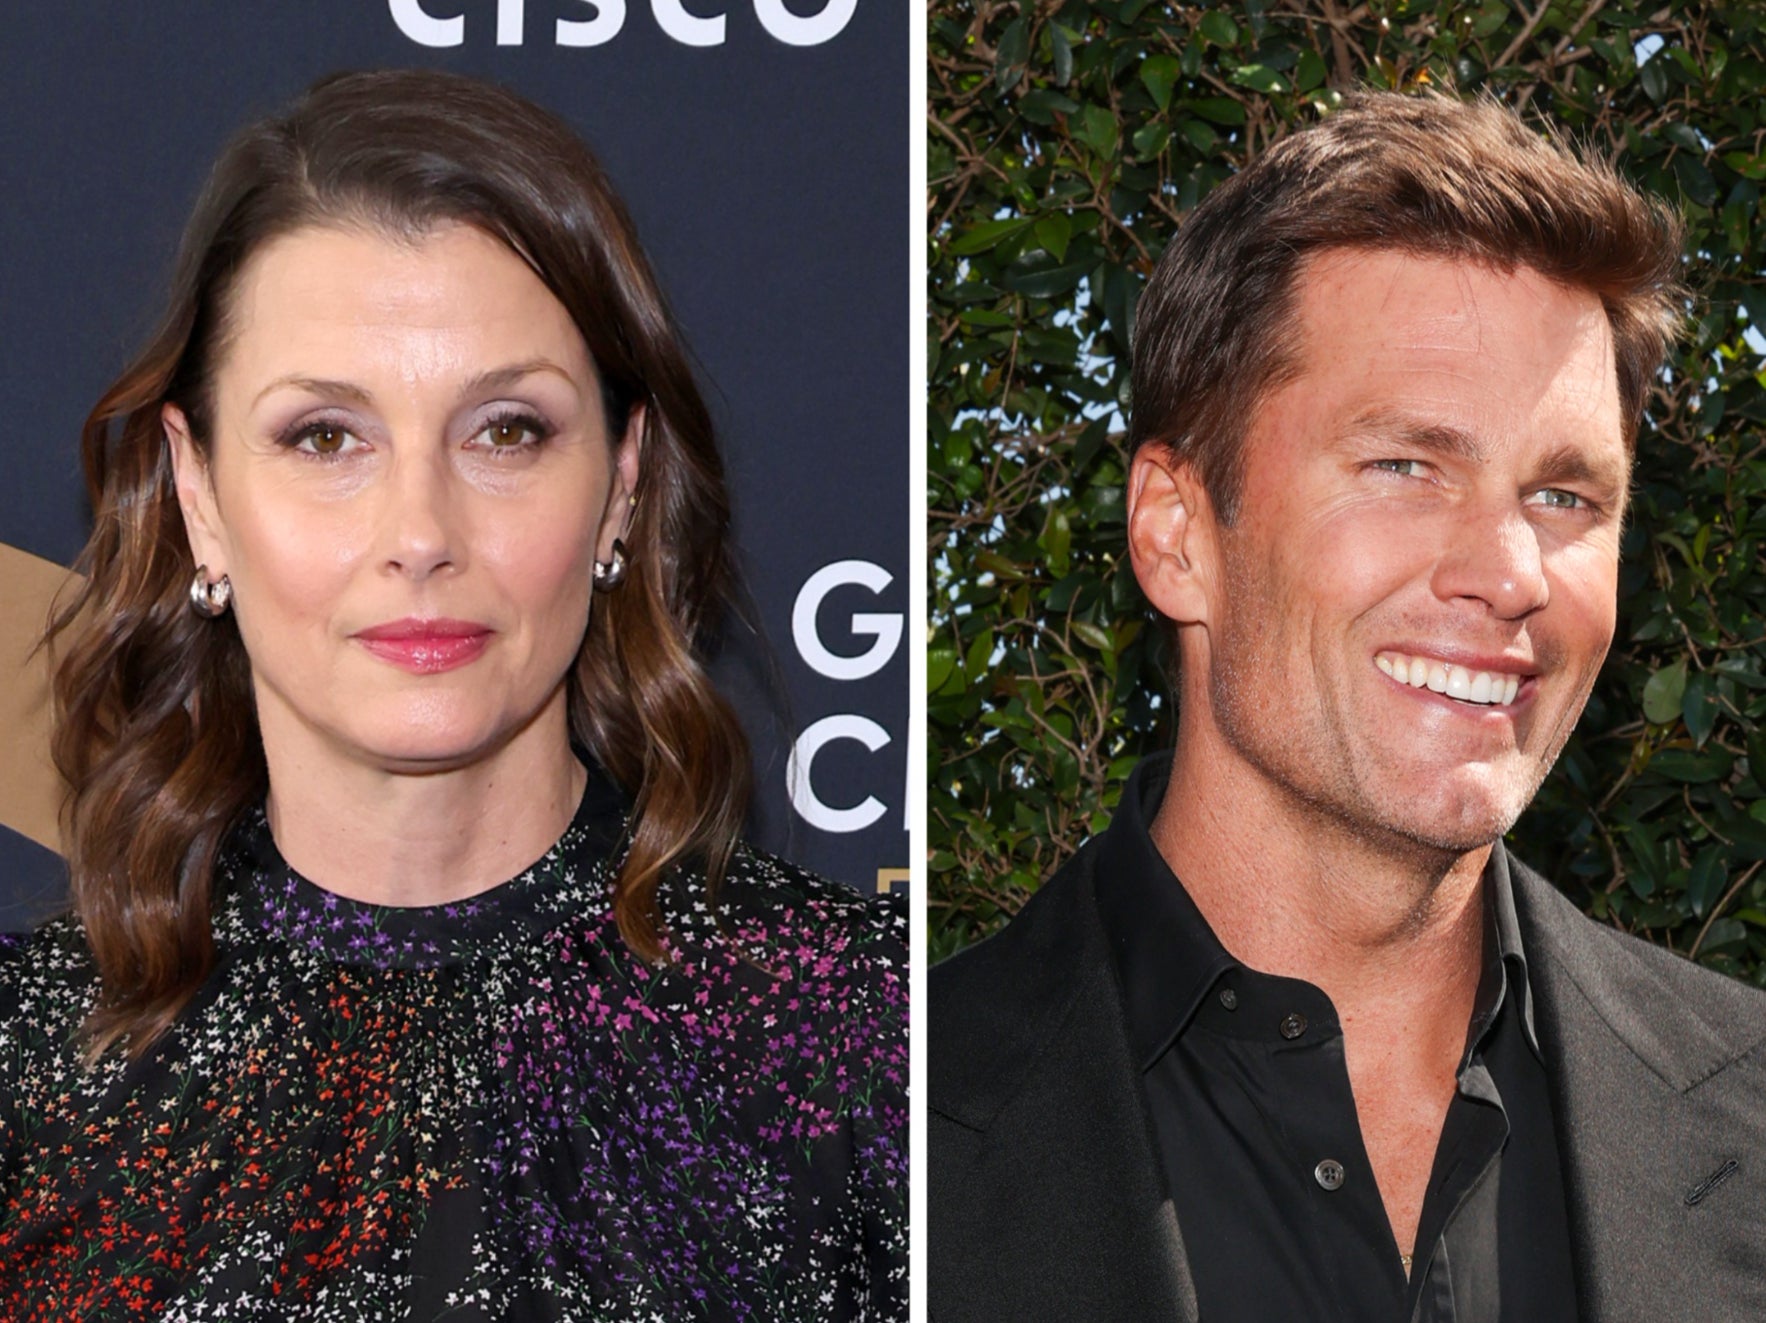 tom brady, gisele bundchen, bridget moynahan shares cryptic post after ex tom brady is roasted for leaving her mid-pregnancy